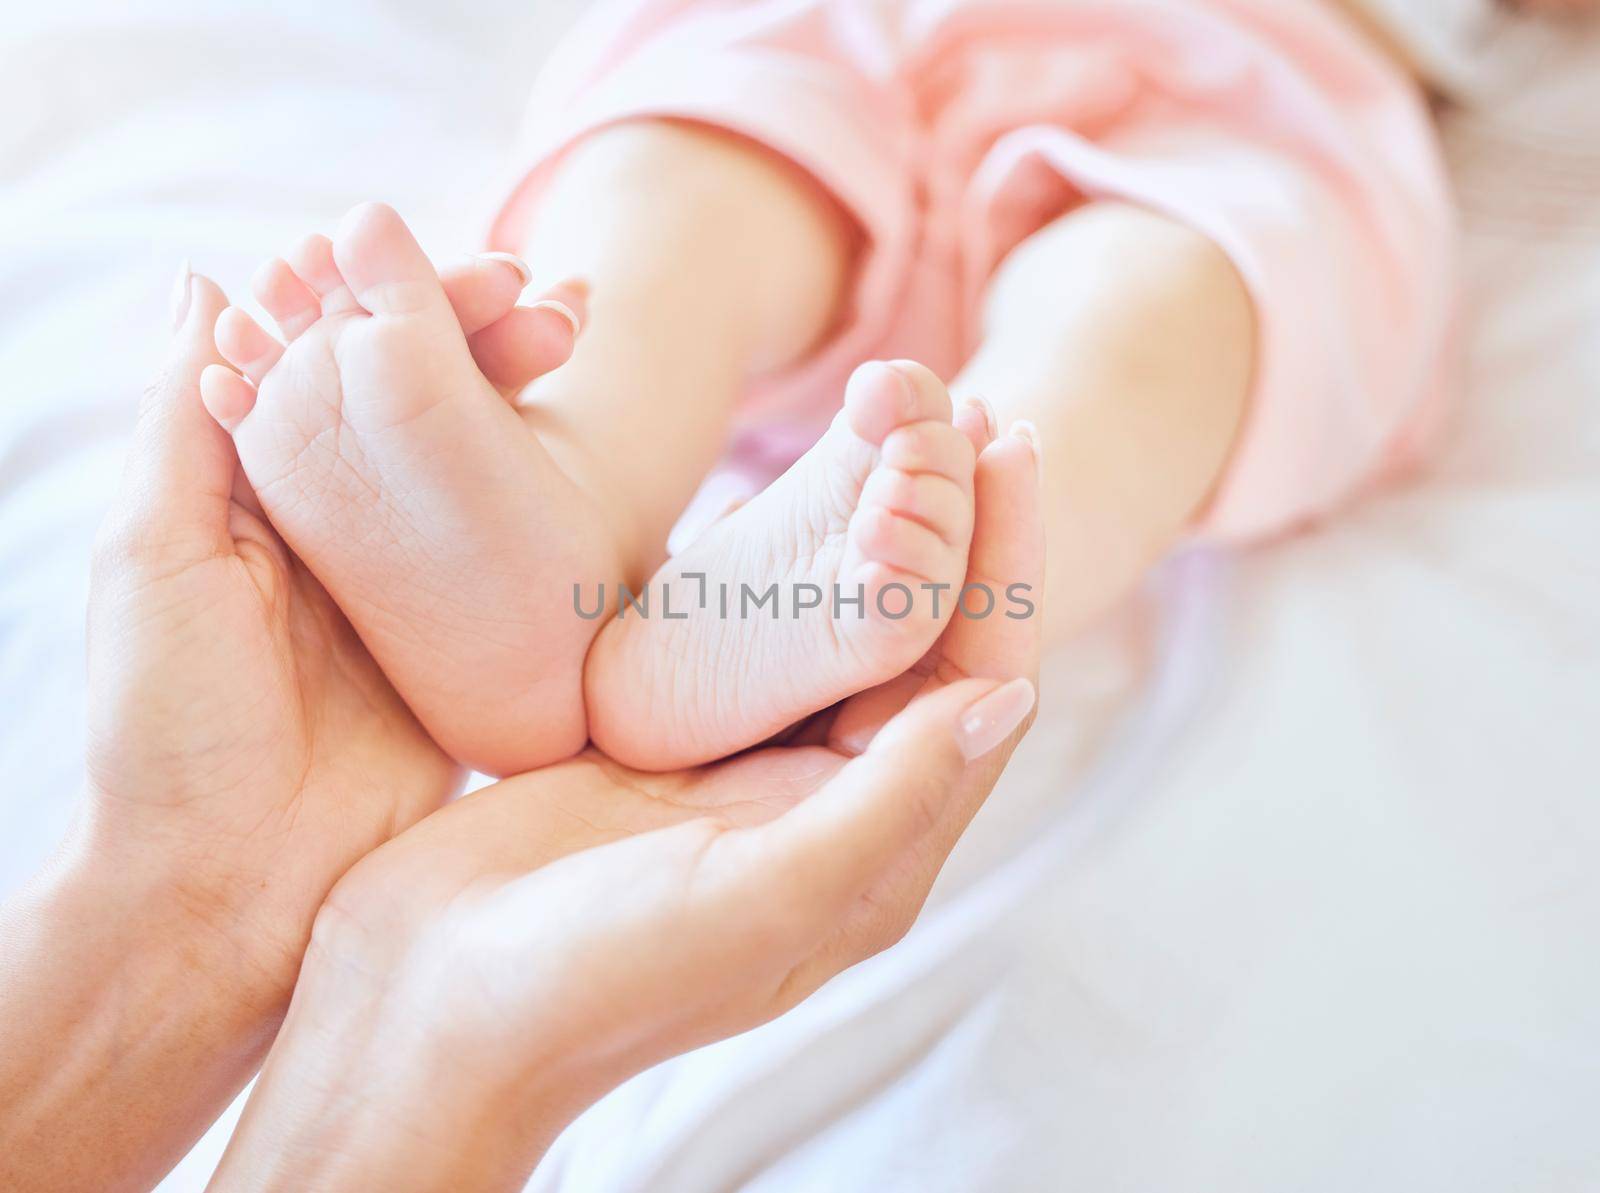 Mother holding baby feet. Closeup of tiny newborn baby feet held by a parent. Small baby toes. Little baby lying on a bed. Woman holding feet of little baby girl. Innocent infant being held by mother.